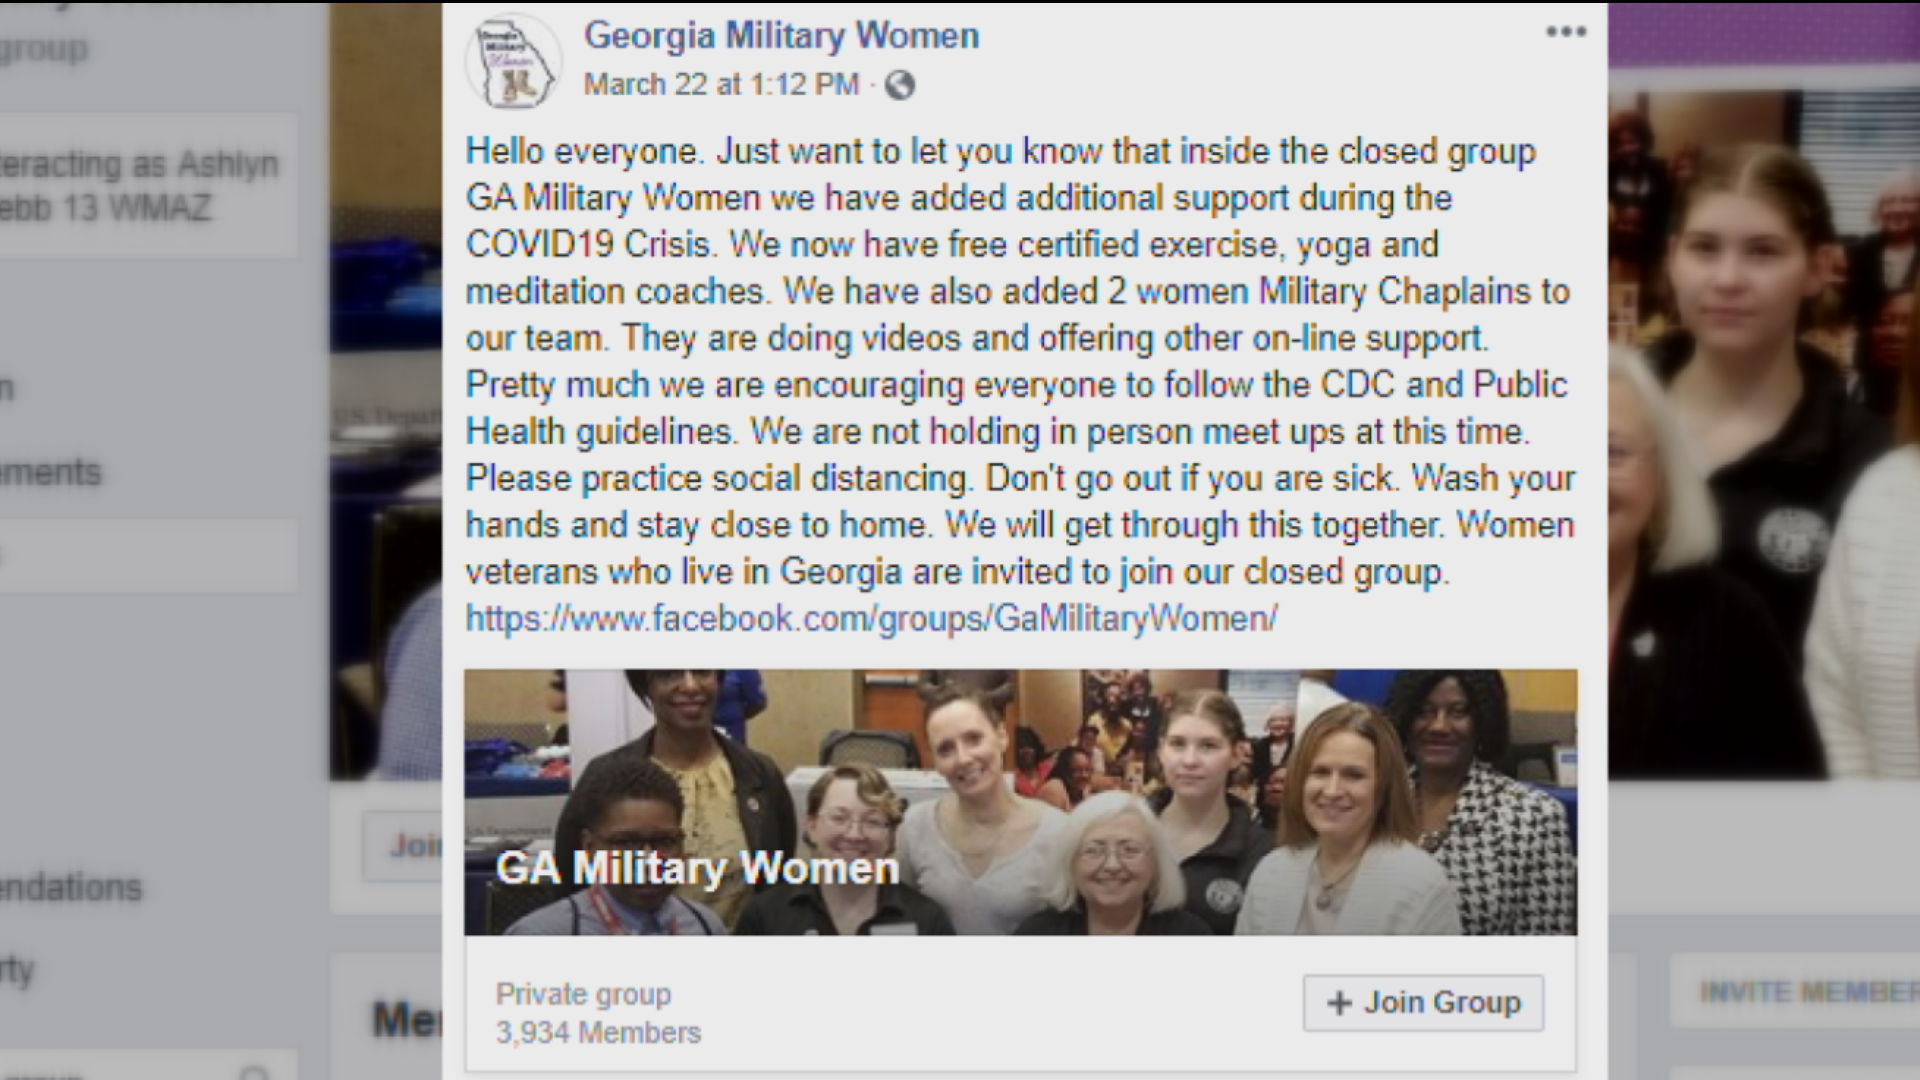 The Facebook group offers yoga, meditation and spiritual care groups for female veterans in Georgia